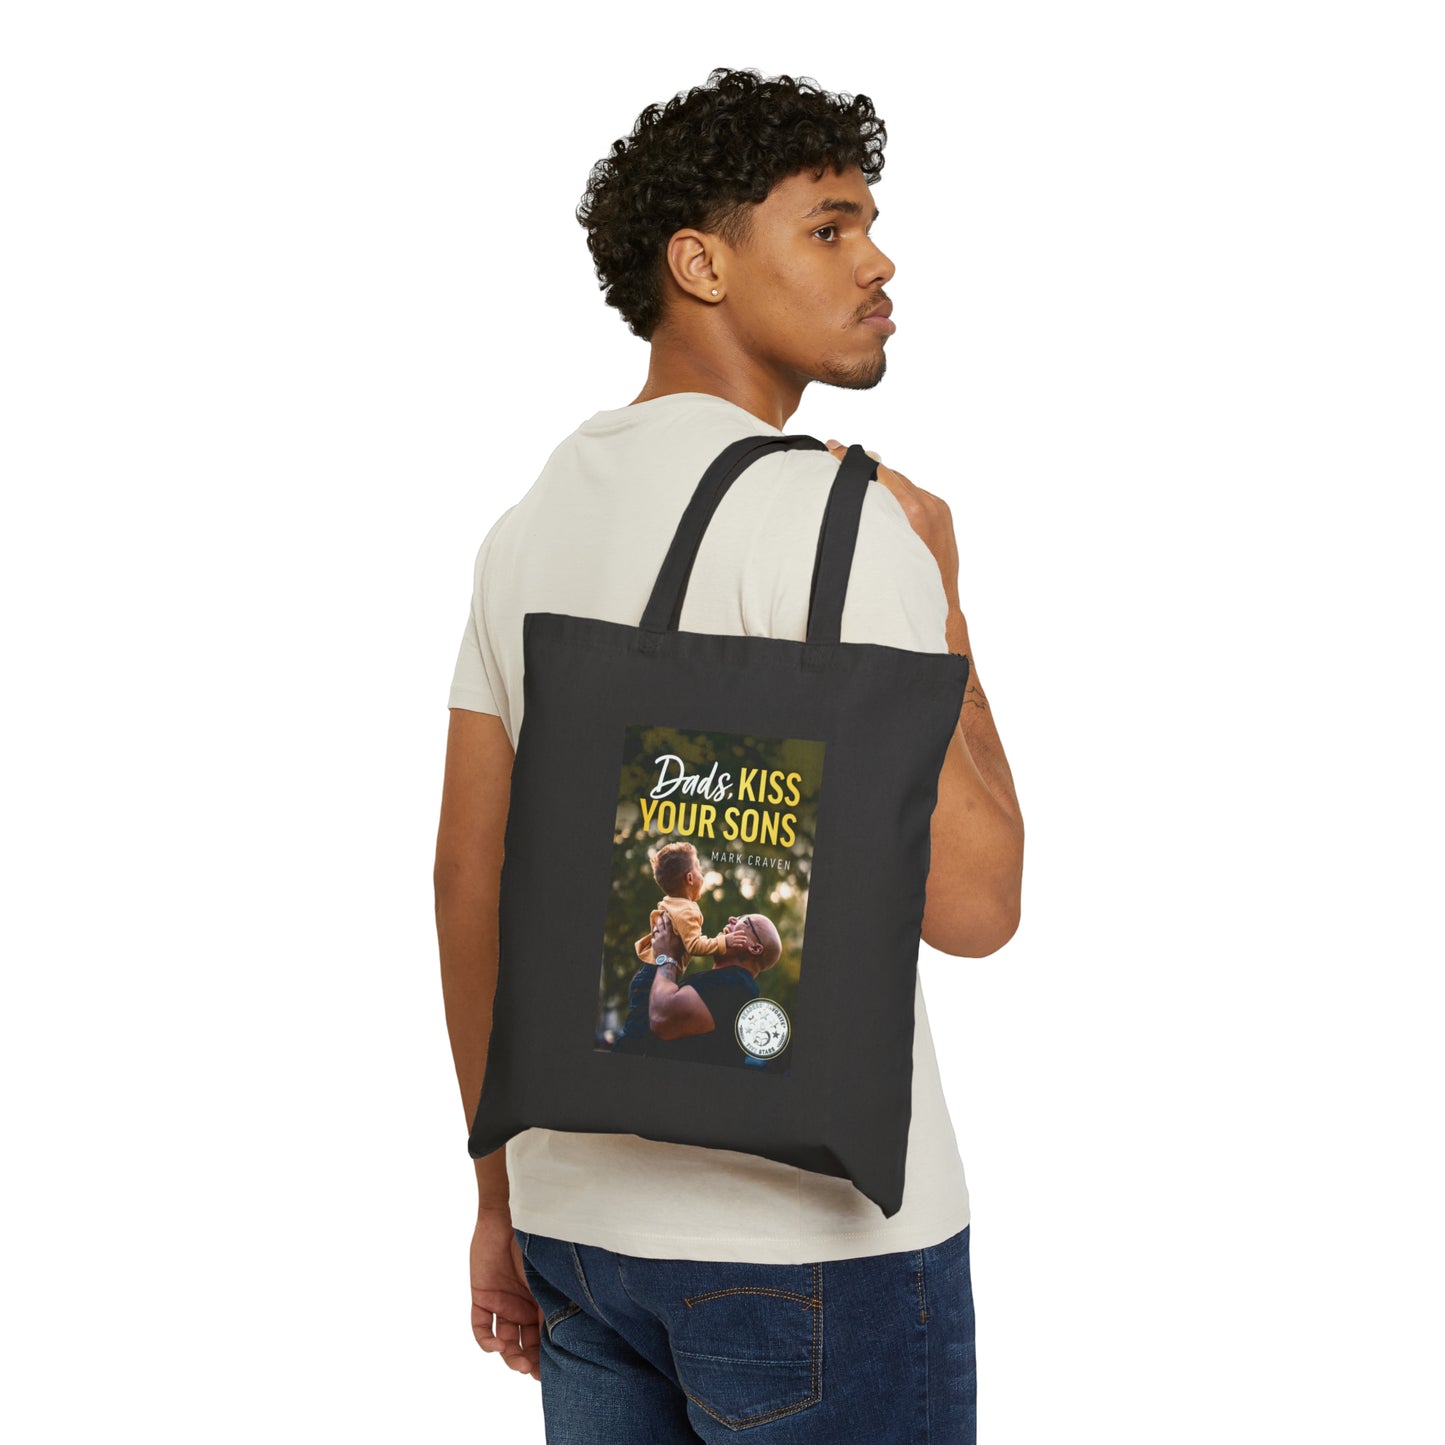 Dads, Kiss Your Sons Tote Bag